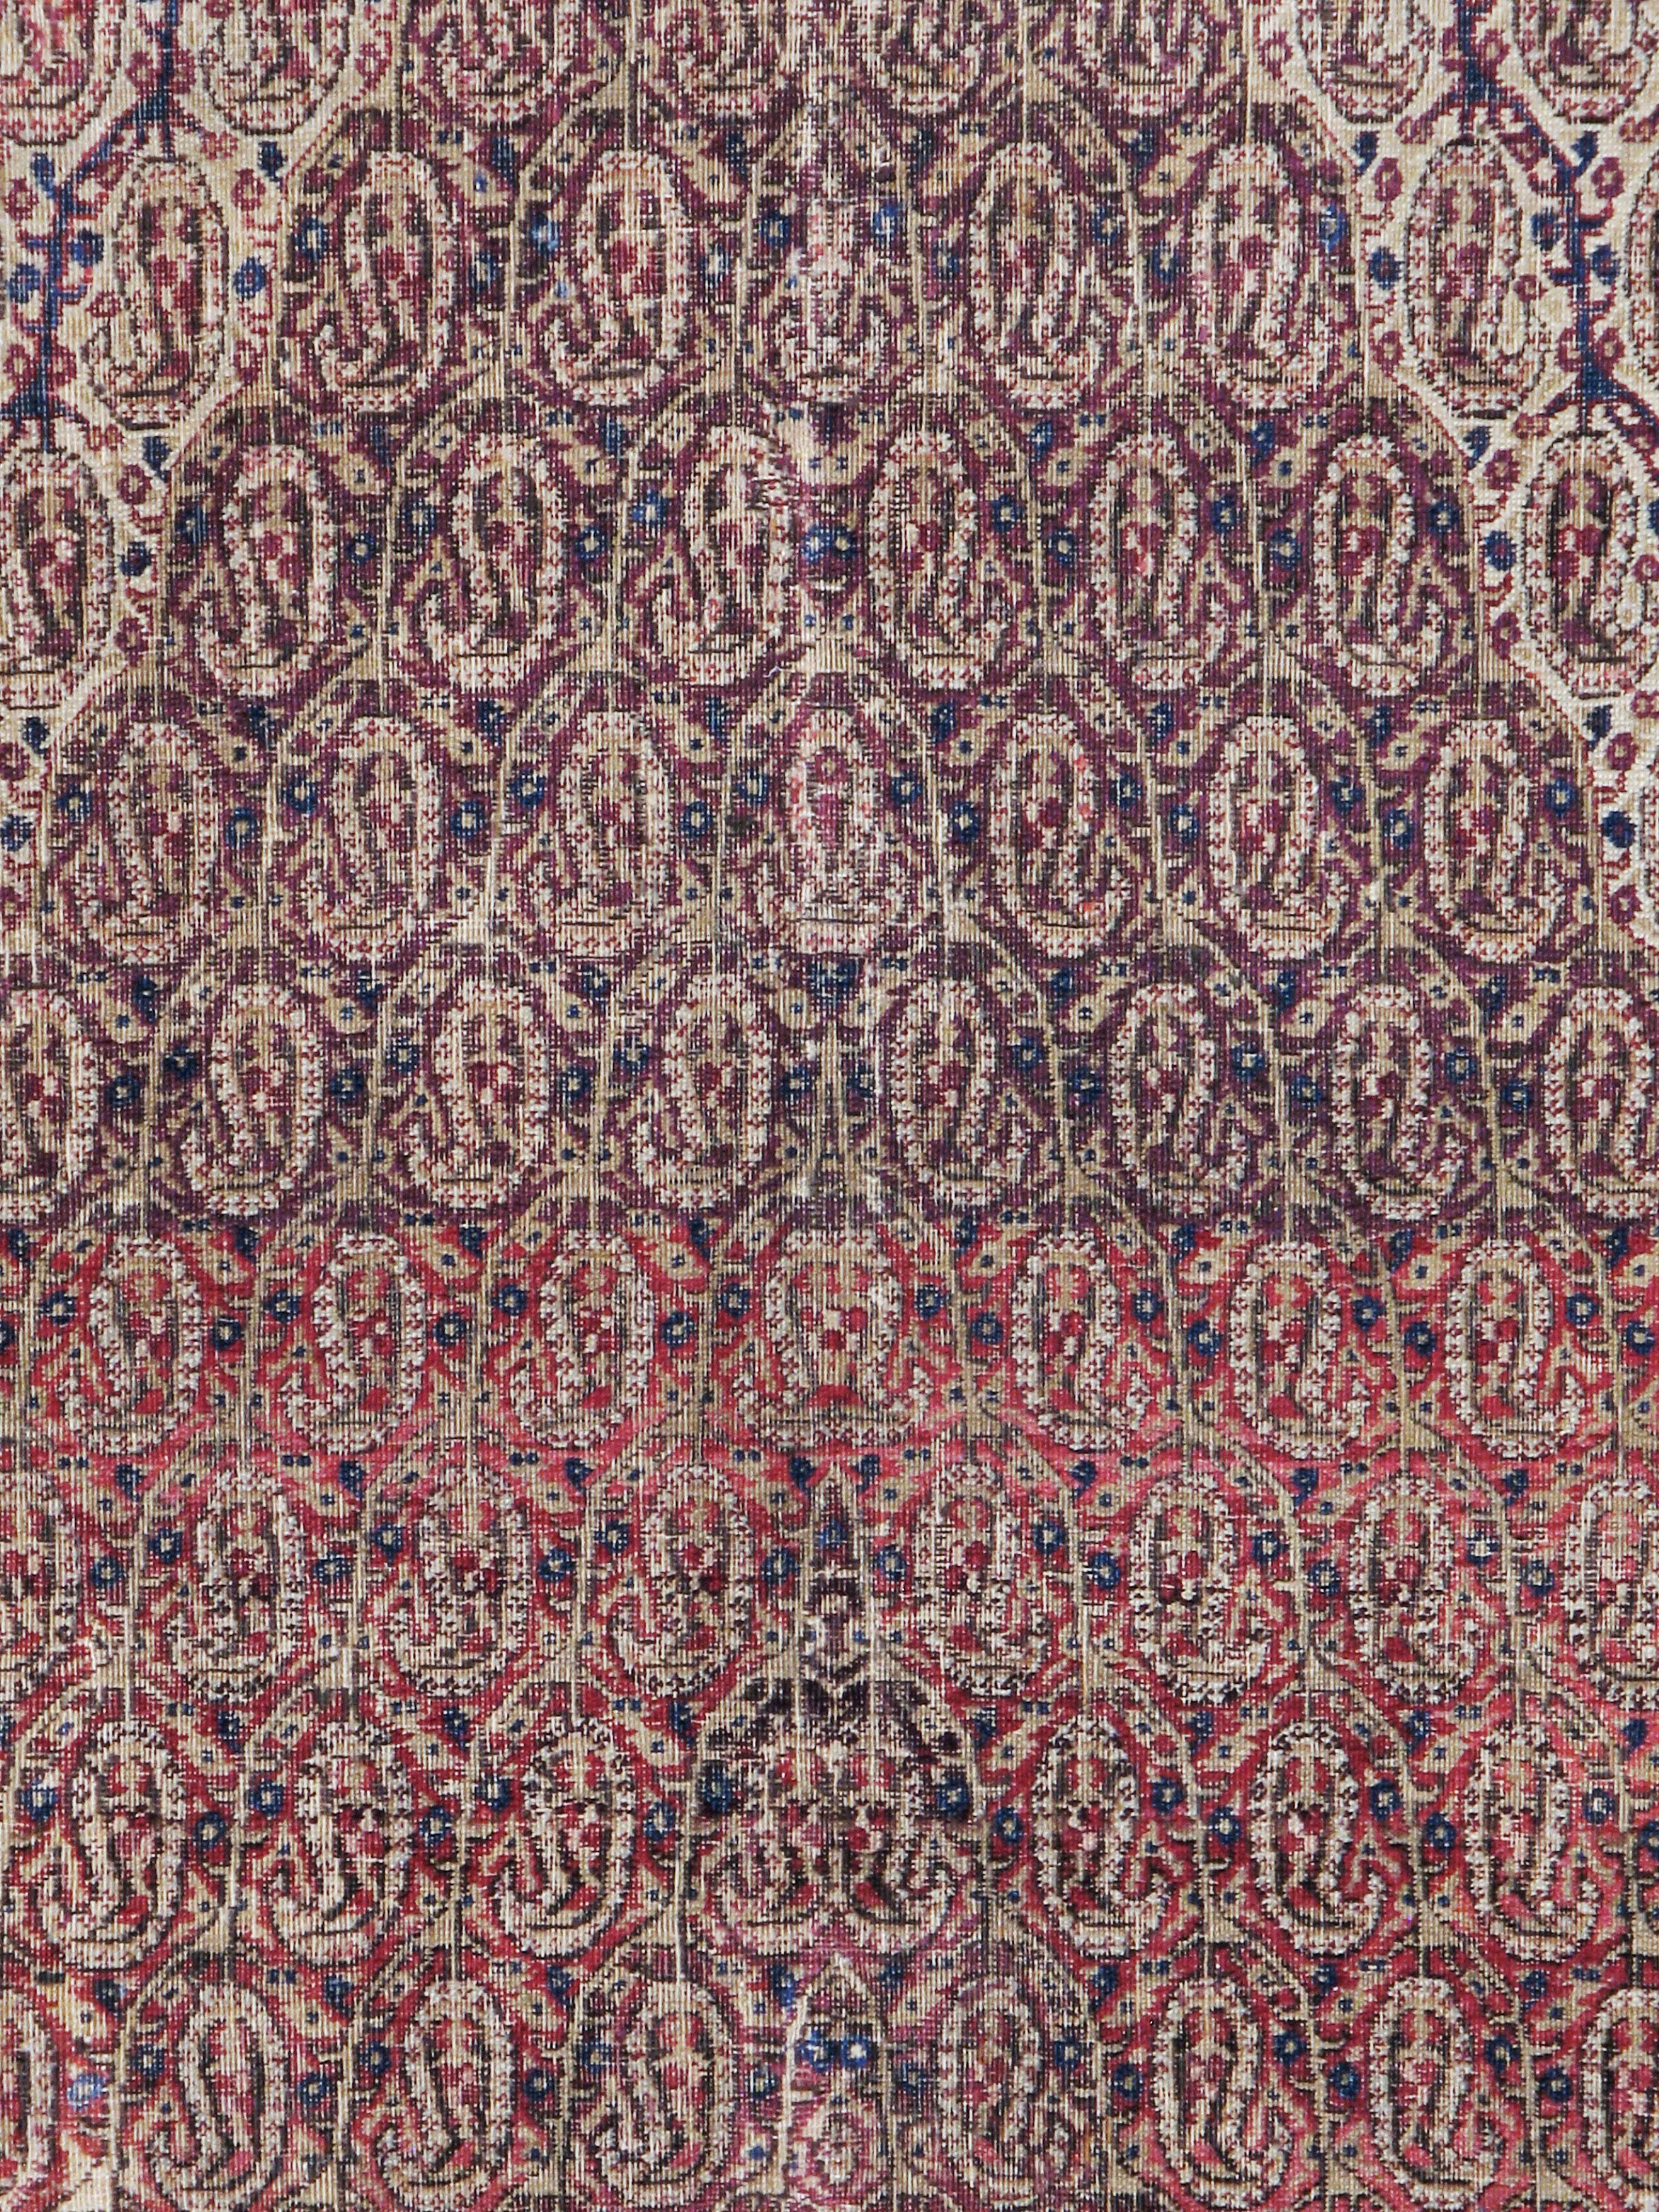 An antique Persian Khorassan carpet from the early 20th century. Botehs (paisleys) in the tall, end-to-end major brown hexagon. Botehs in the ivory field corners. Botehs in the main border. If you love the paisley design, you’ll positively adore